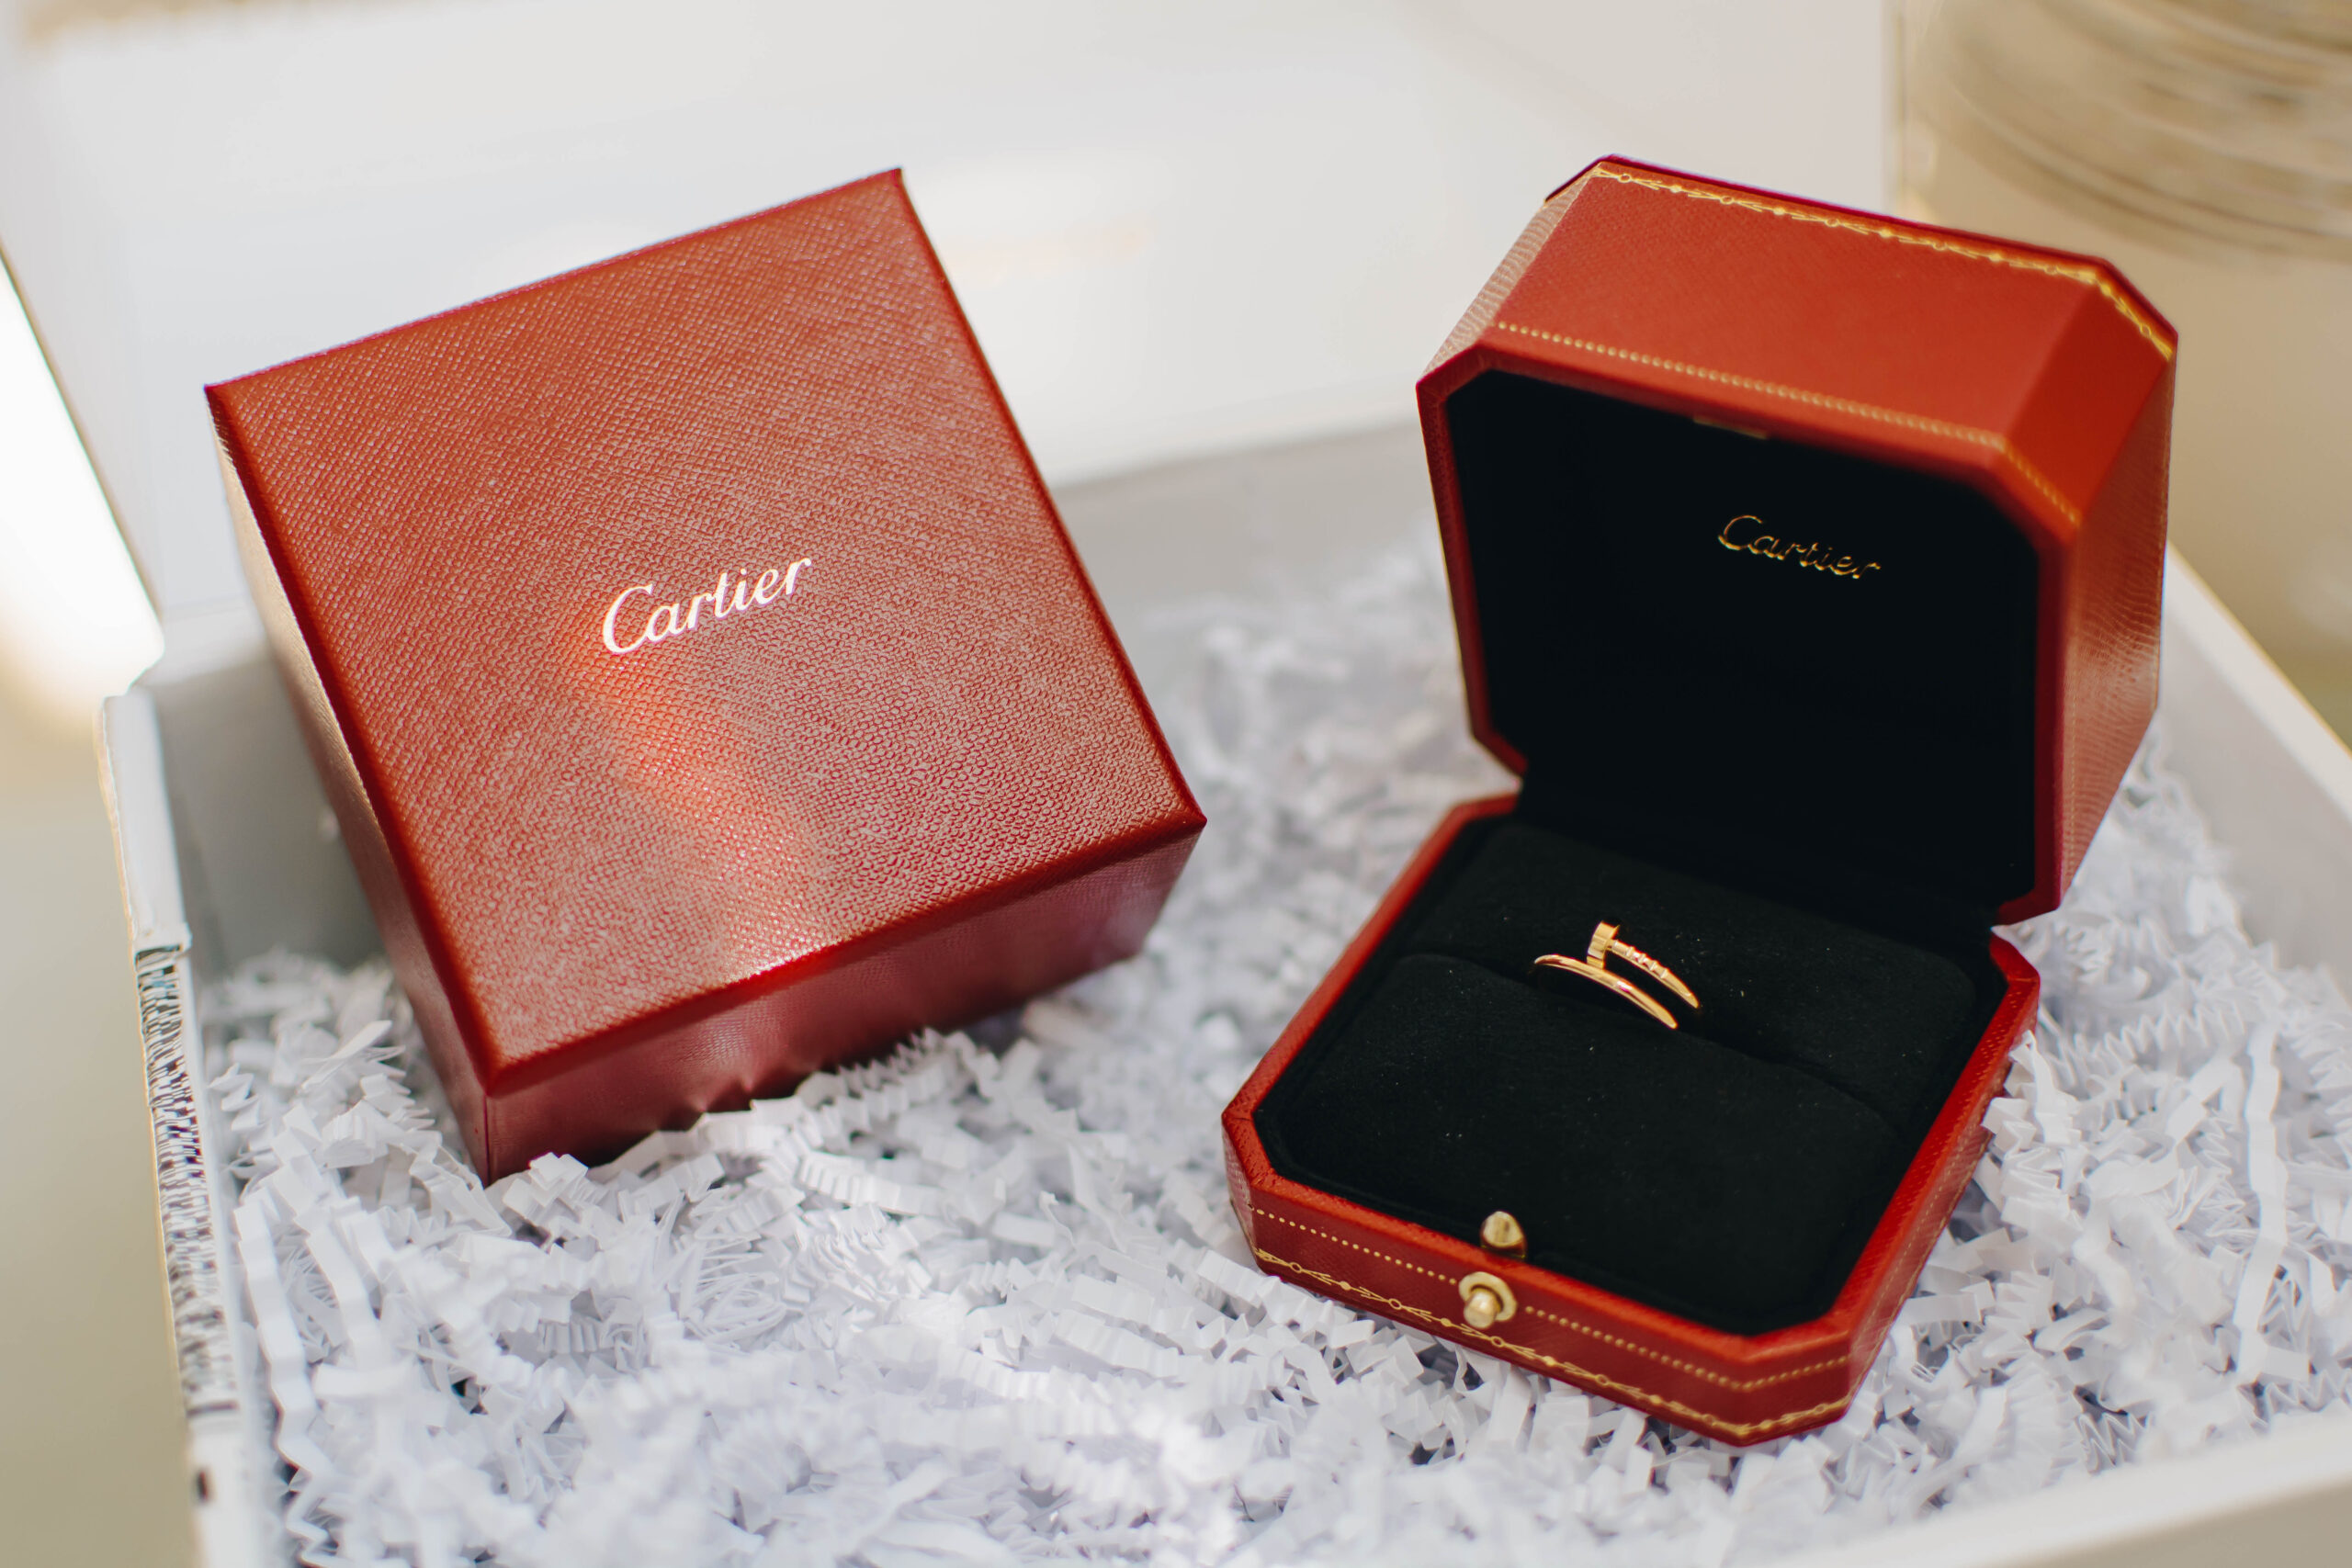 Cartier Juste Un Clou Ring in Yellow Gold smaller version.